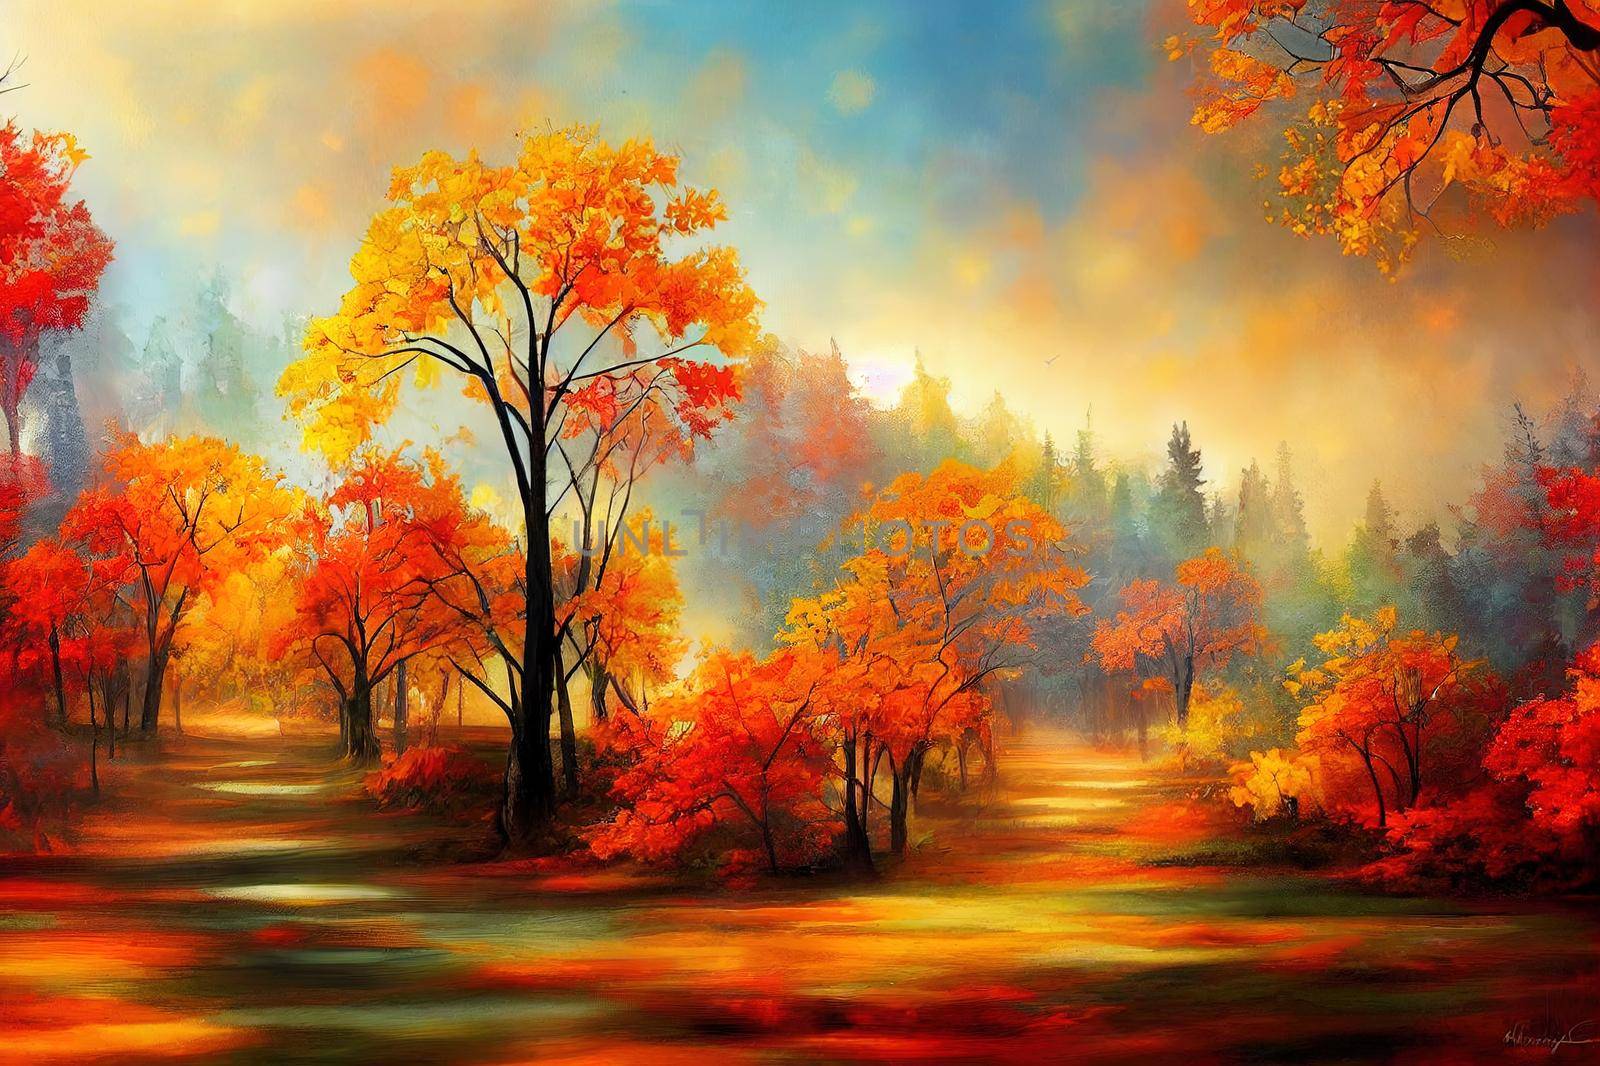 Abstract autumn landscape. Beautiful artistic image for creative design projects posters, banners, cards, websites, invitations, magazines, wallpapers, books. Acrylic on canvas.. High quality illustration